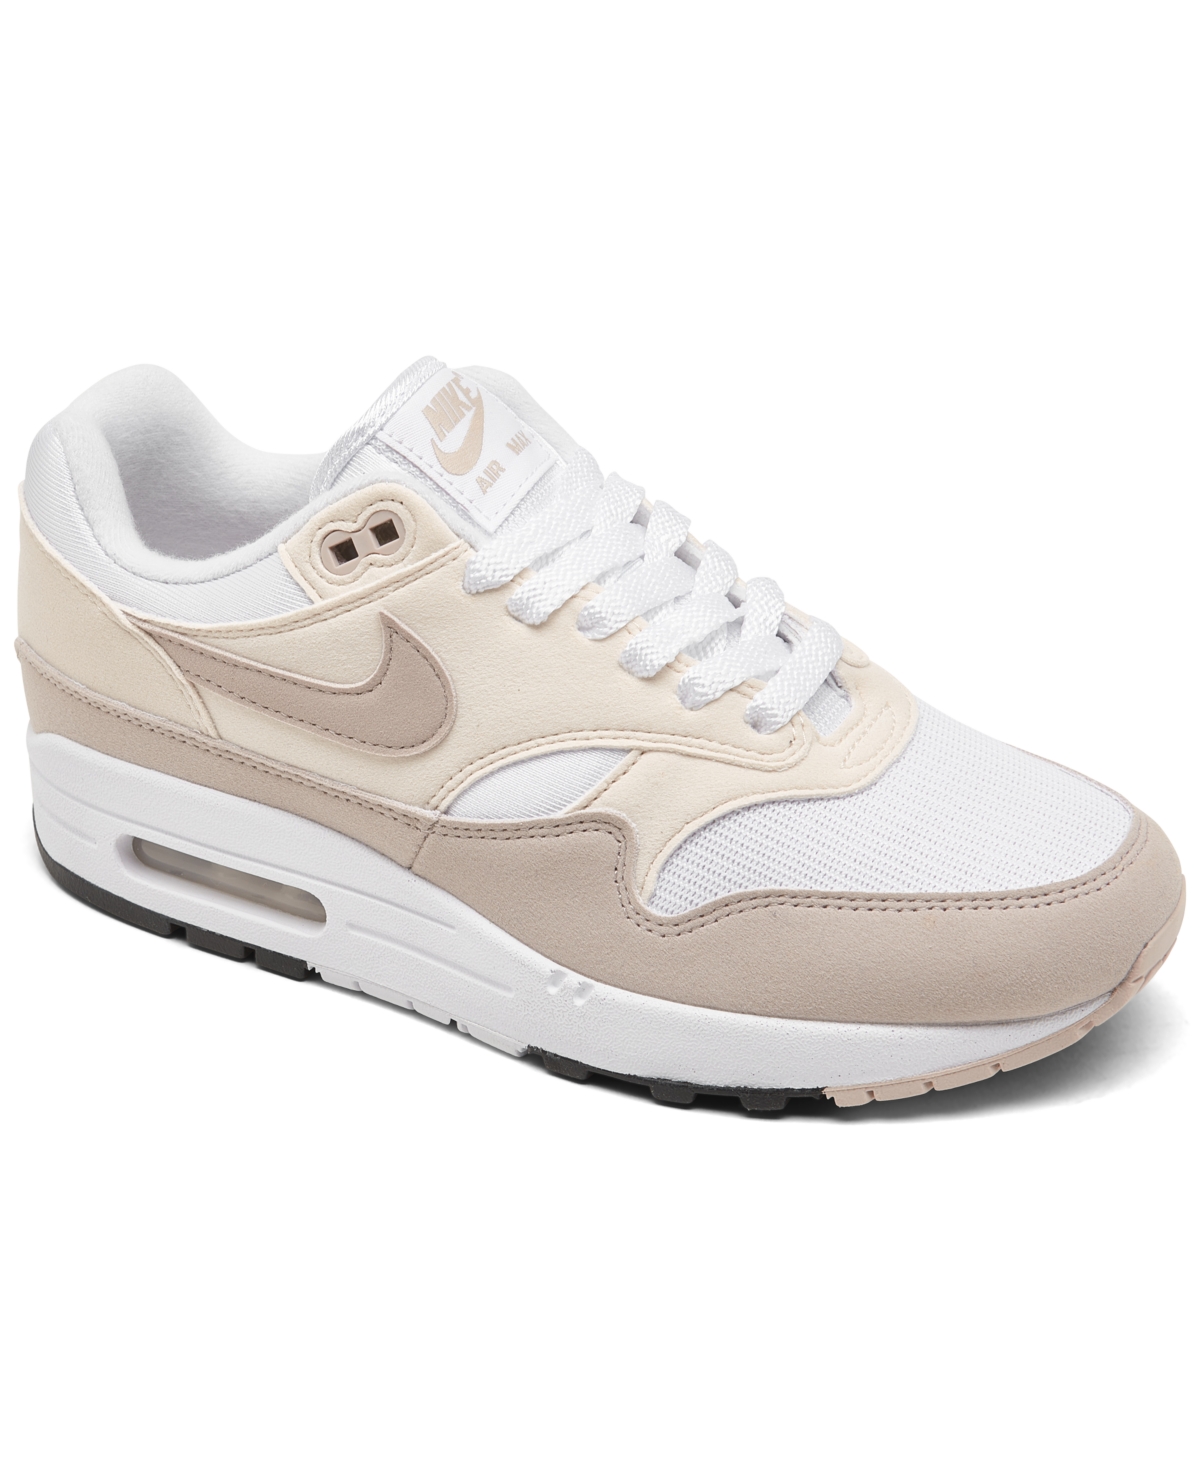 Women's Air Max 1 '87 Casual Sneakers from Finish Line - WHITE/PLTV